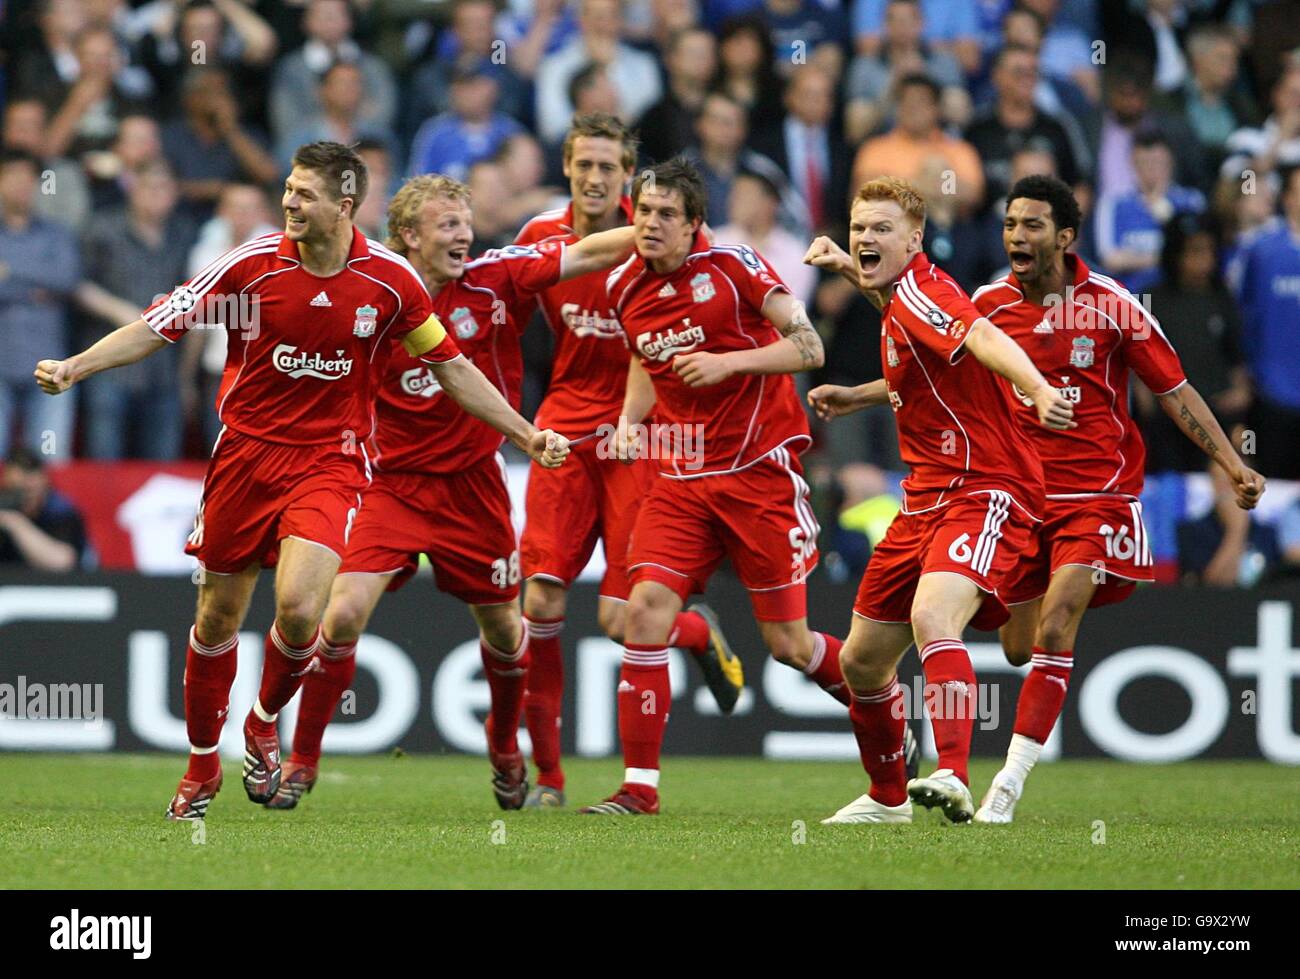 Liverpool players celebrate after Daniel Agger scores the first goal of the game. L-R: Steven Gerrard, Dirk Kuyt, Peter Crouch, Daniel Agger, John Arne Riise and Jermaine Pennant. Stock Photo